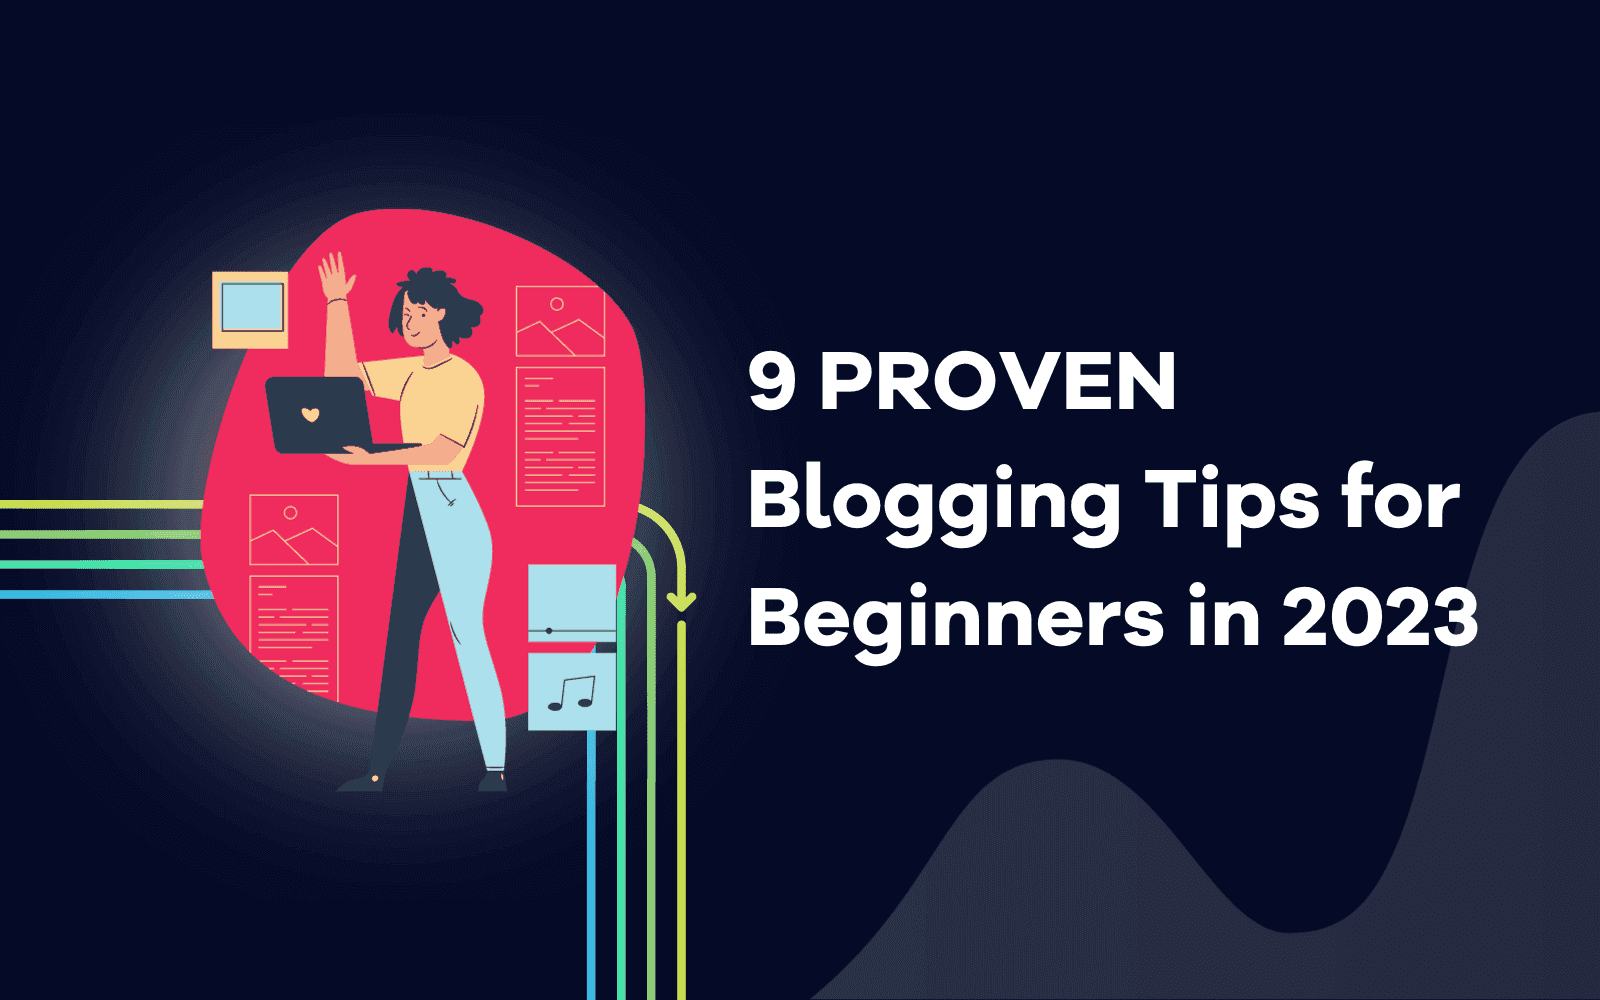 PROVEN Blogging Tips for Beginners in 2023